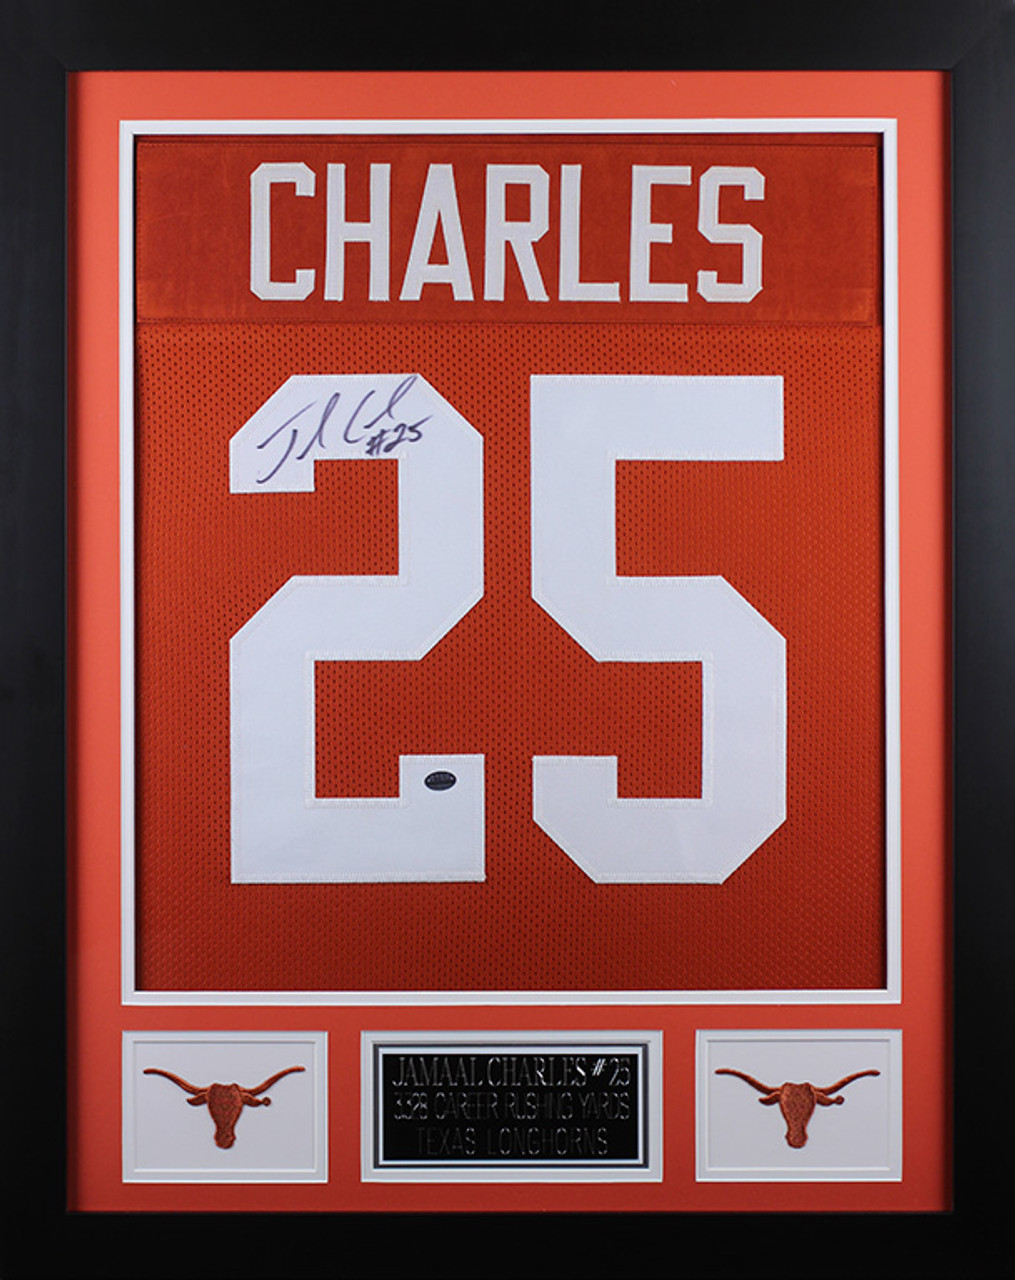 Jersey Framing-Small Deluxe